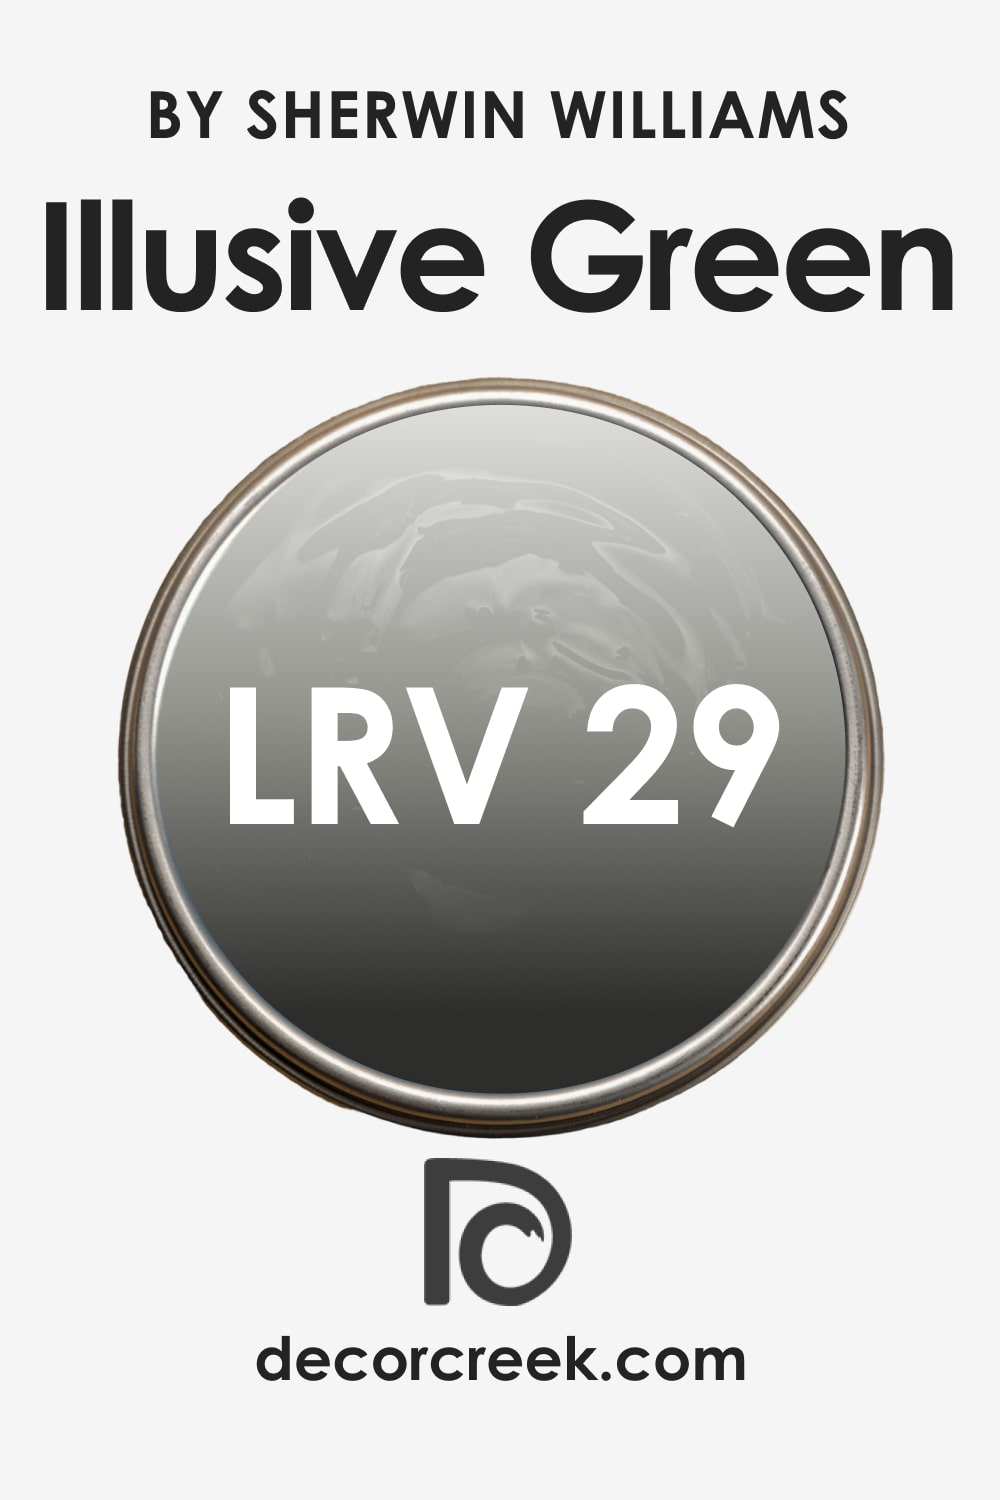 LRV of Illusive Green SW-9164 Paint Color